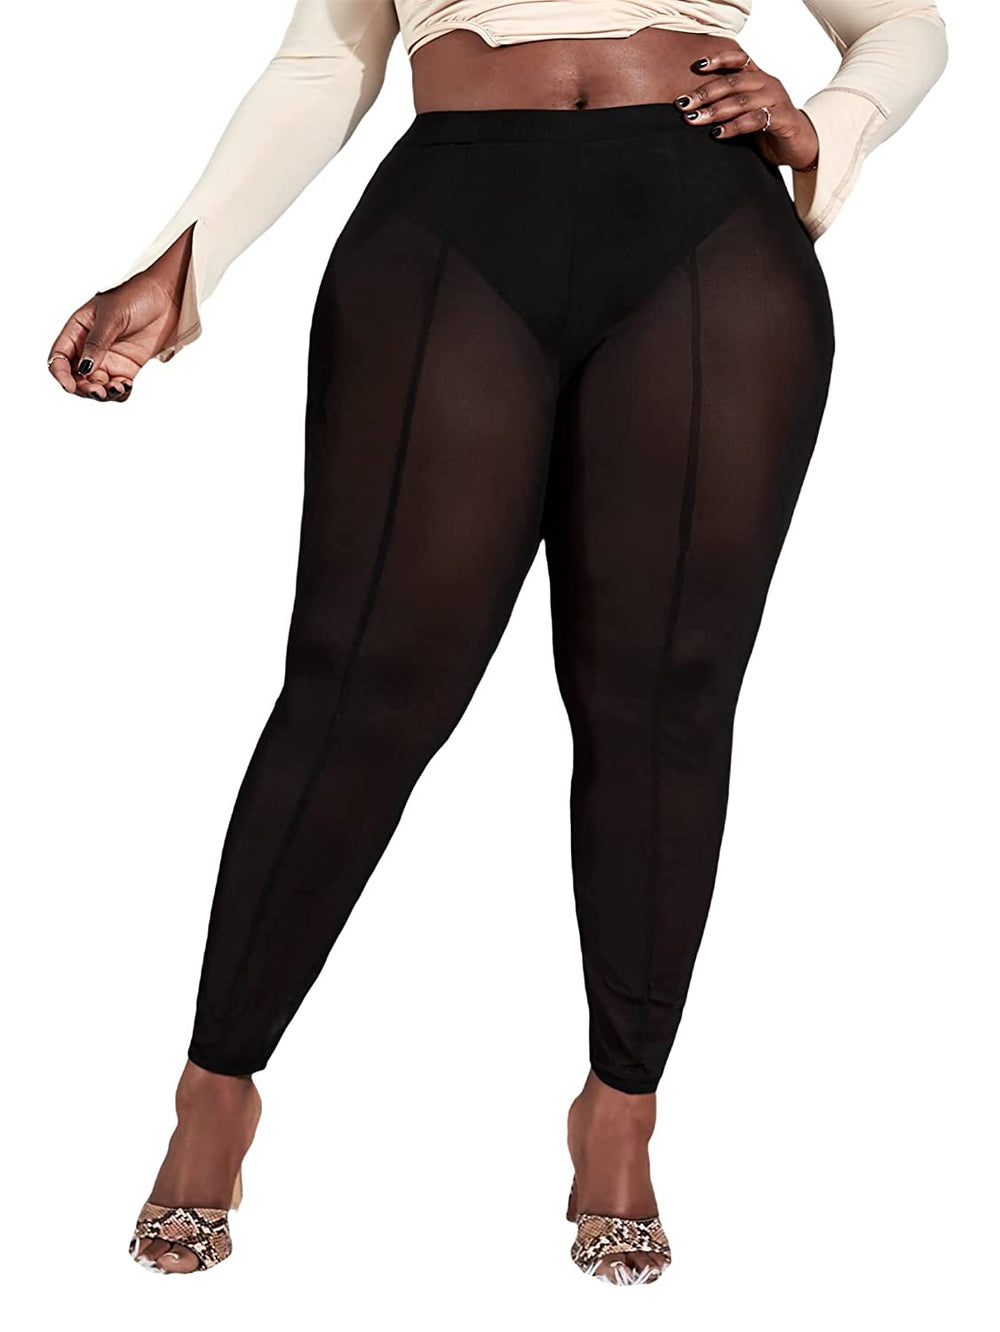 Panty lined Mesh leggings – Snatched Silhouettes